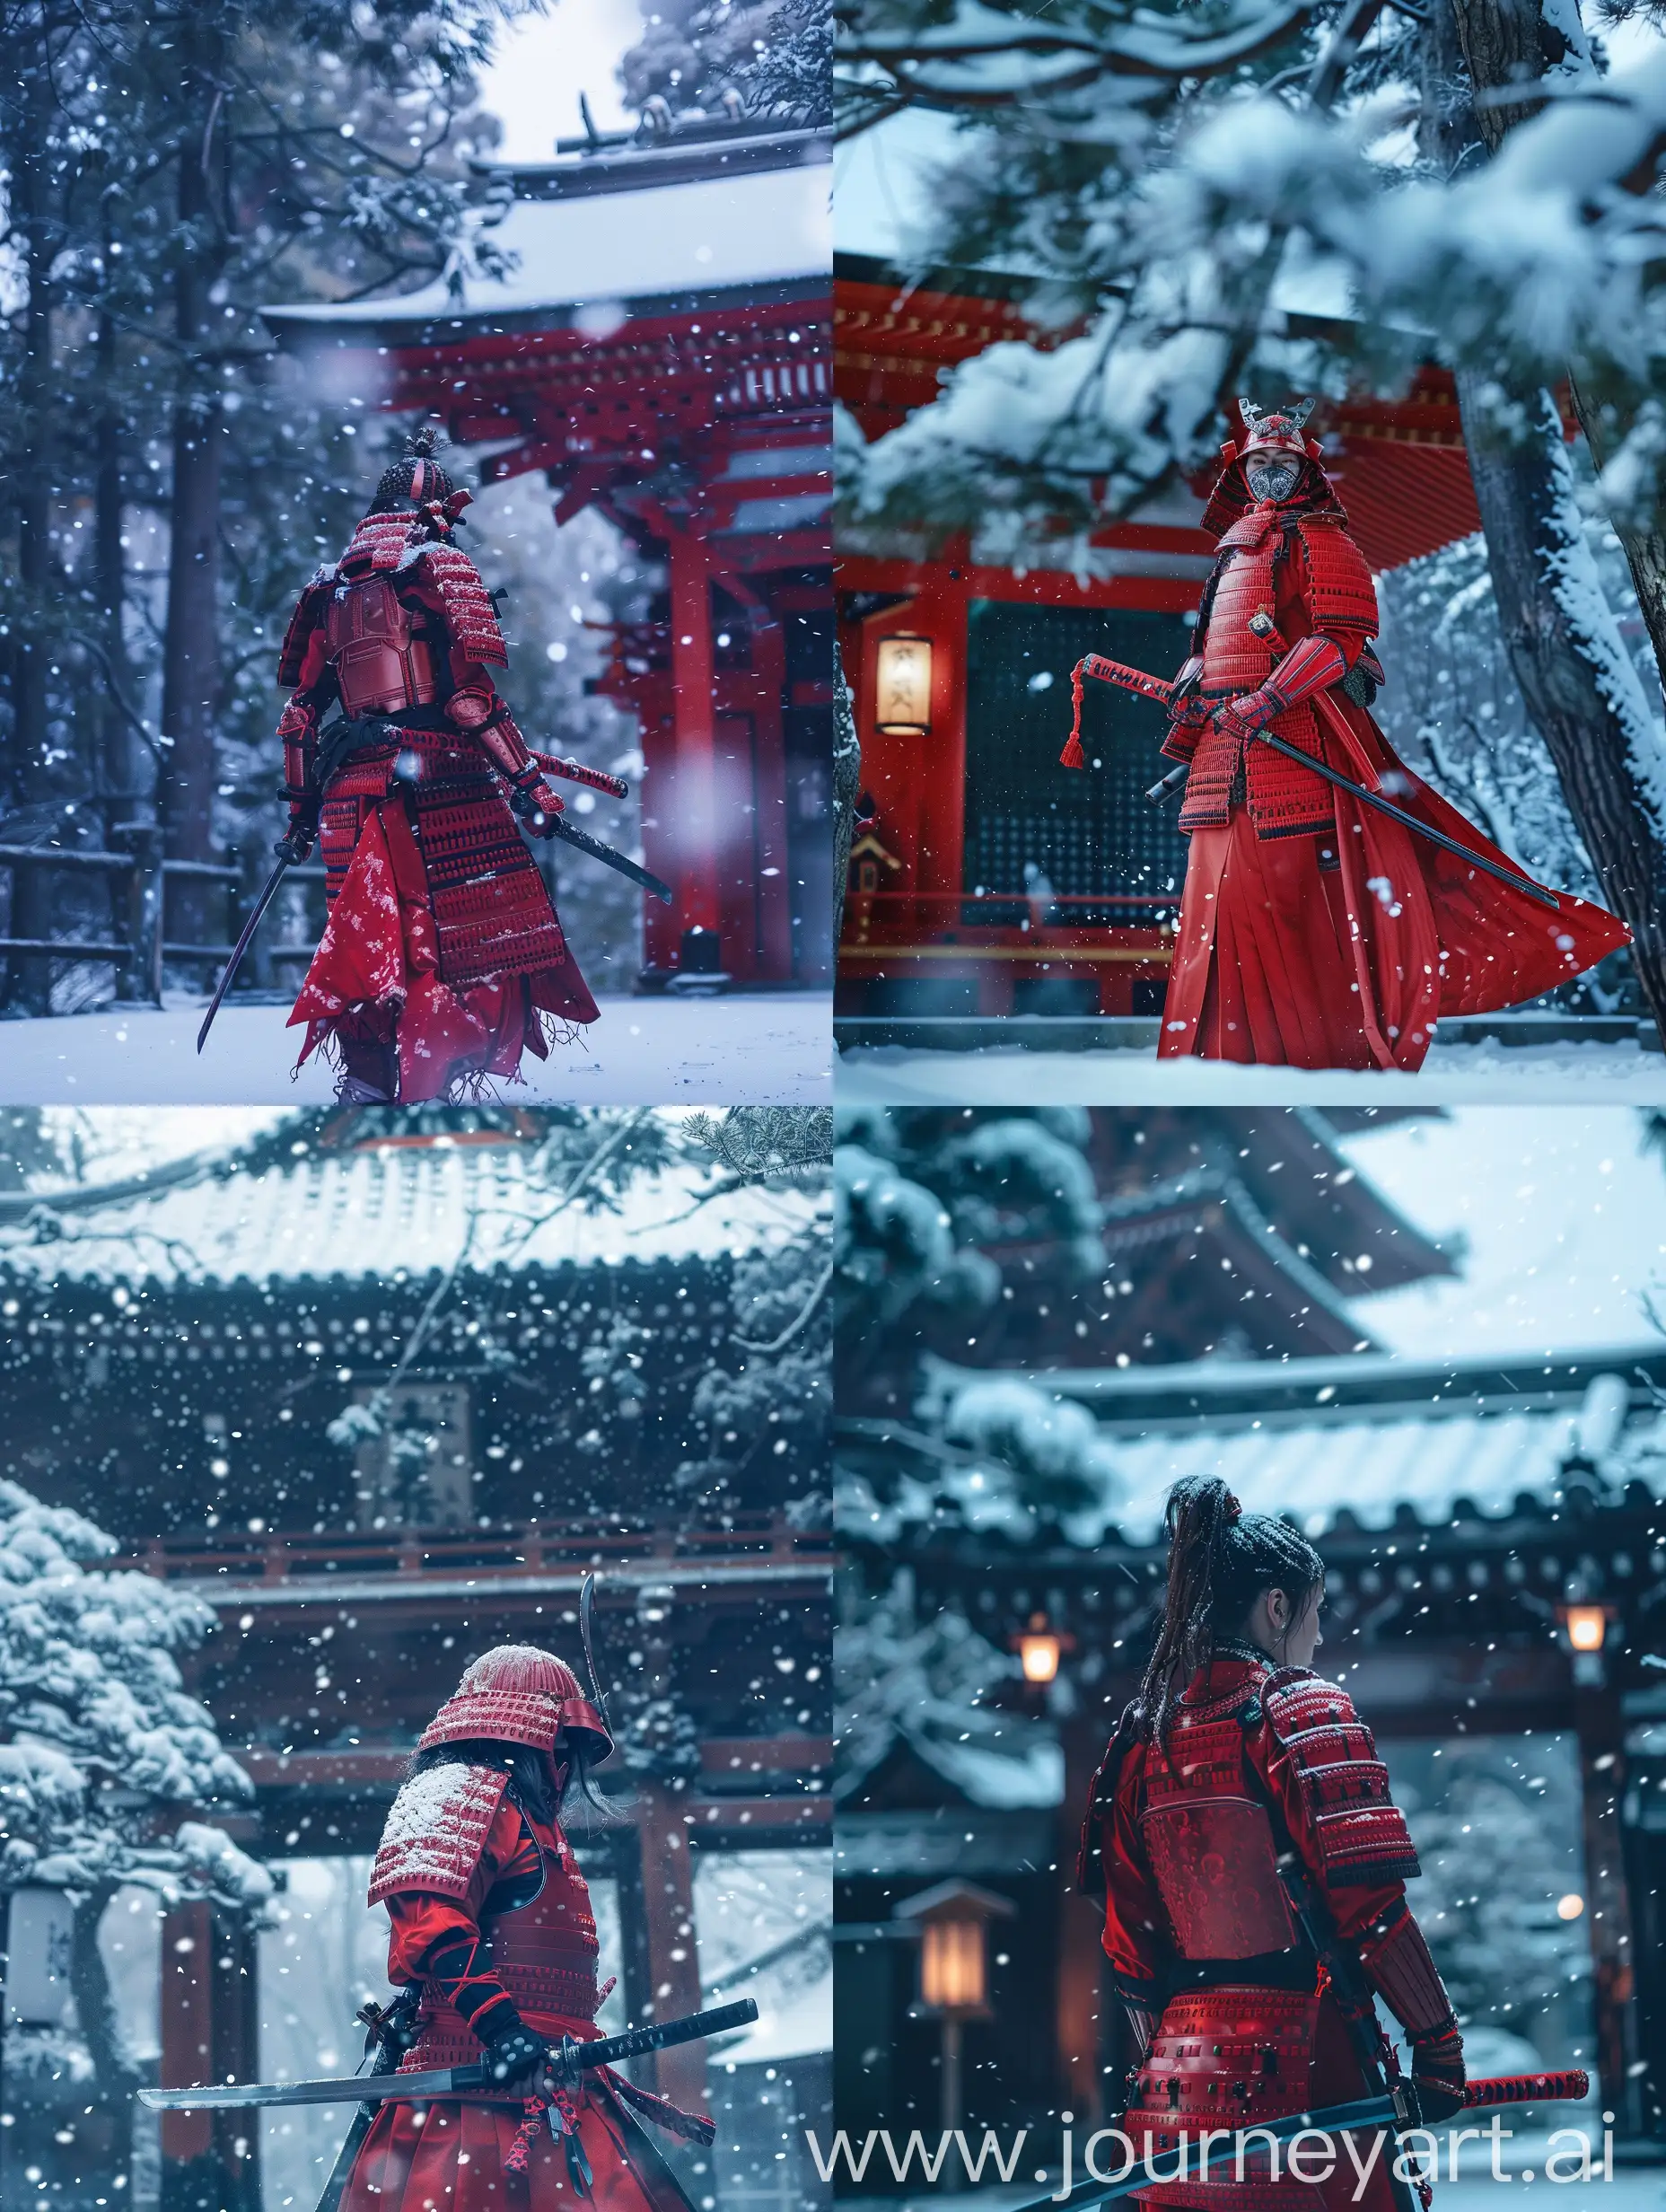 Location: Outside a Japanese temple
Background: Temple, trees, snow
Style: High-fashion editorial
What to photograph: Samurai in red armor with a sword
Theme: High-fashion samurai warrior
Visual effects: Fashion film look
Camera effects: Blur and haze
Time: Snowy evening
Quality: High resolution
Shape: Vertical (4:5 aspect ratio)
Main feature: Red technical fabric
Details: Show detailed views of the fabric